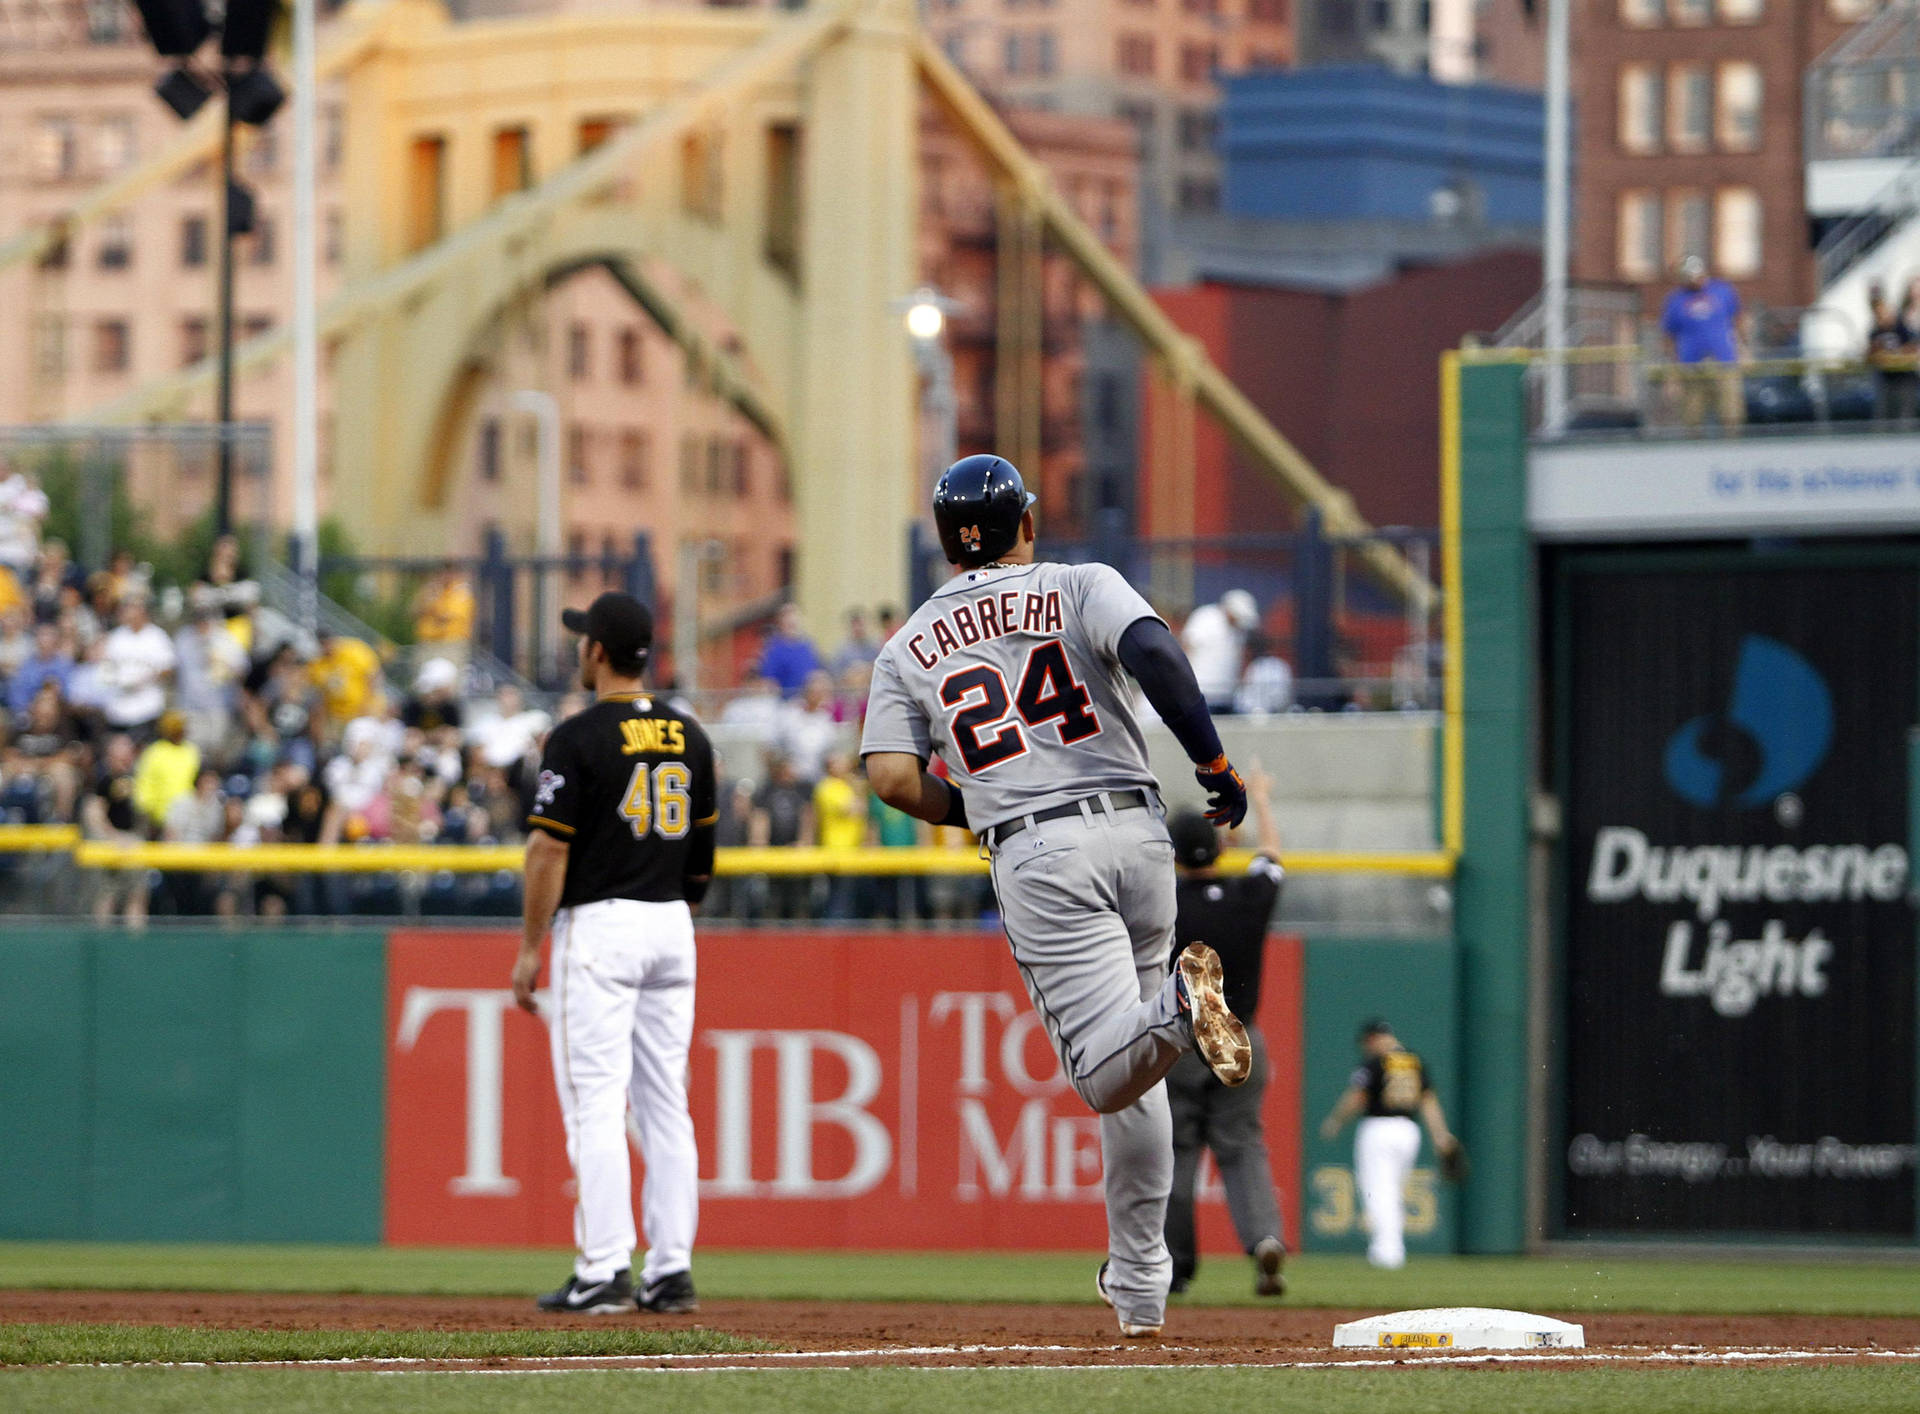 Download Miguel Cabrera Trying To Make A Home Run Wallpaper